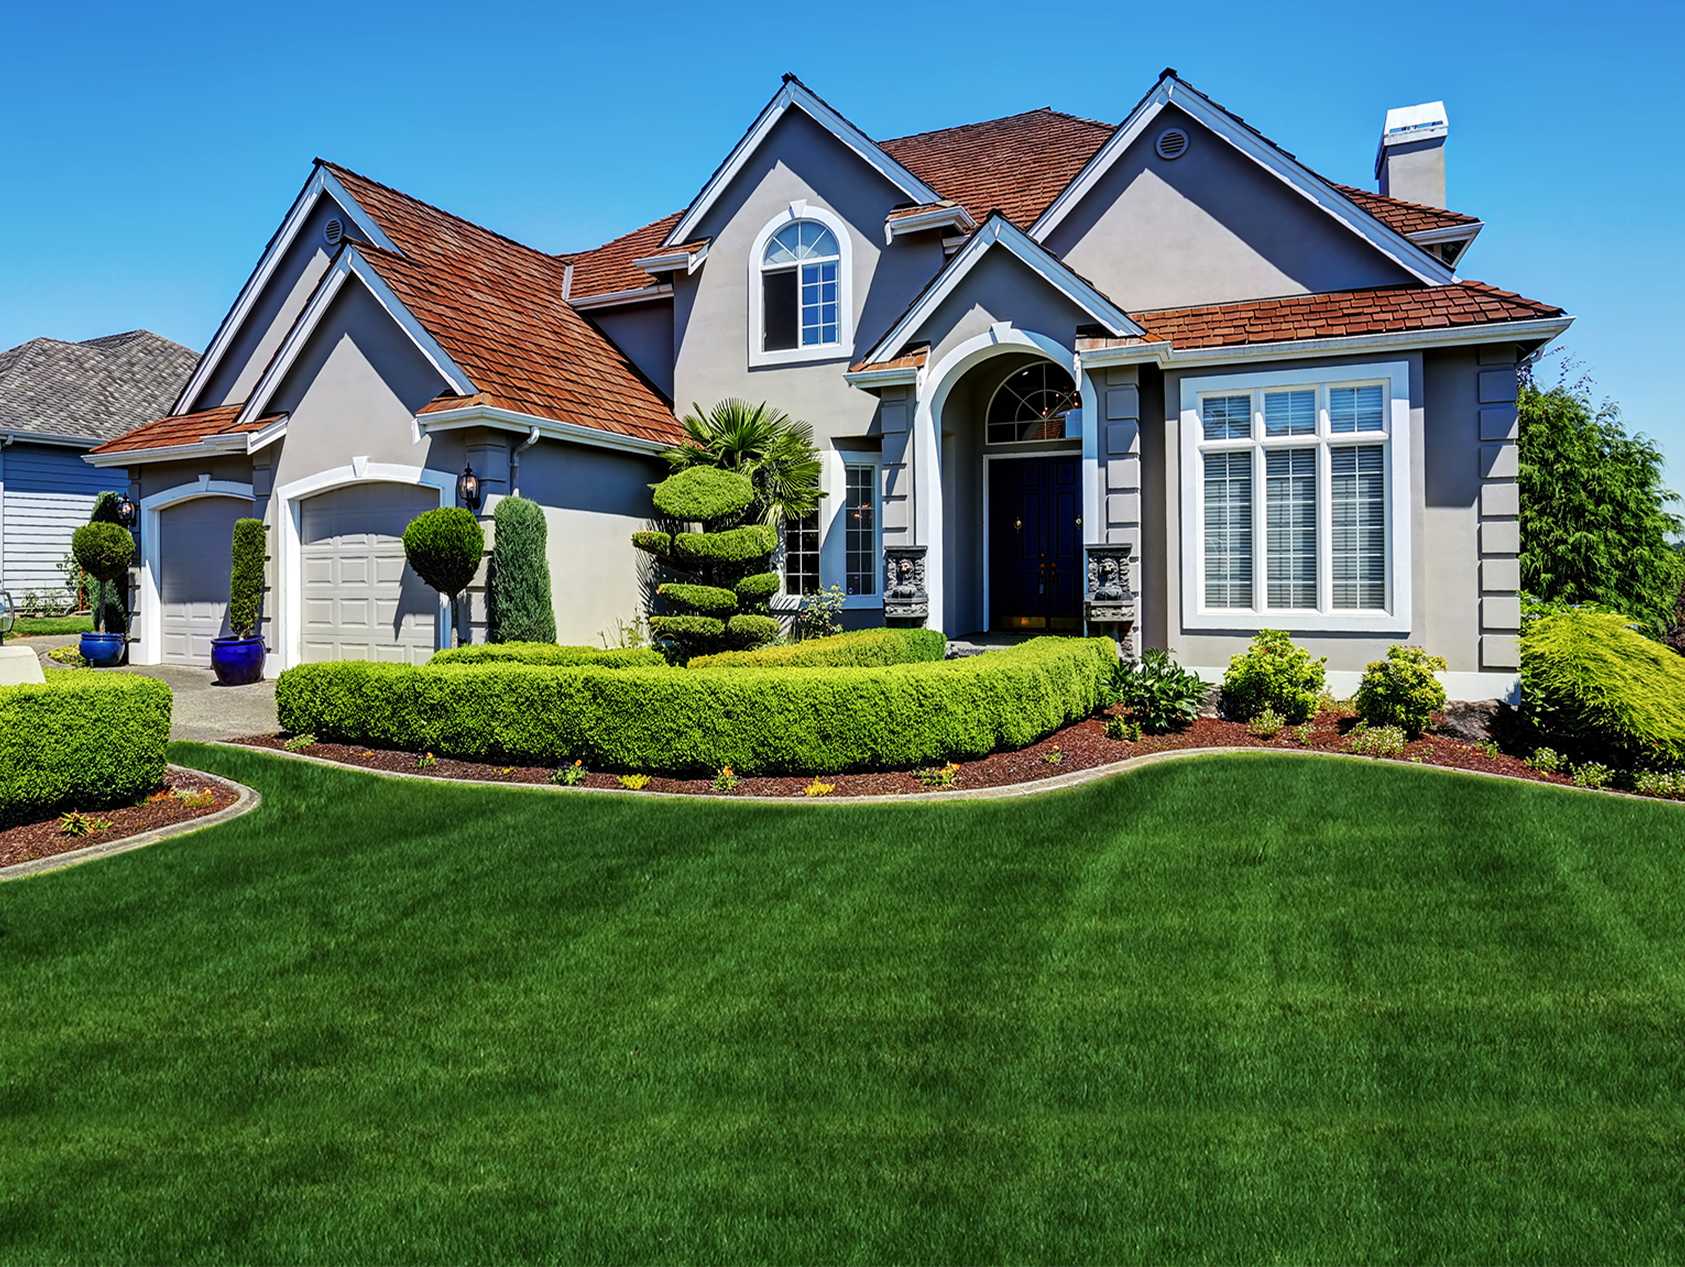 a large house with a lush green lawn in front of it .